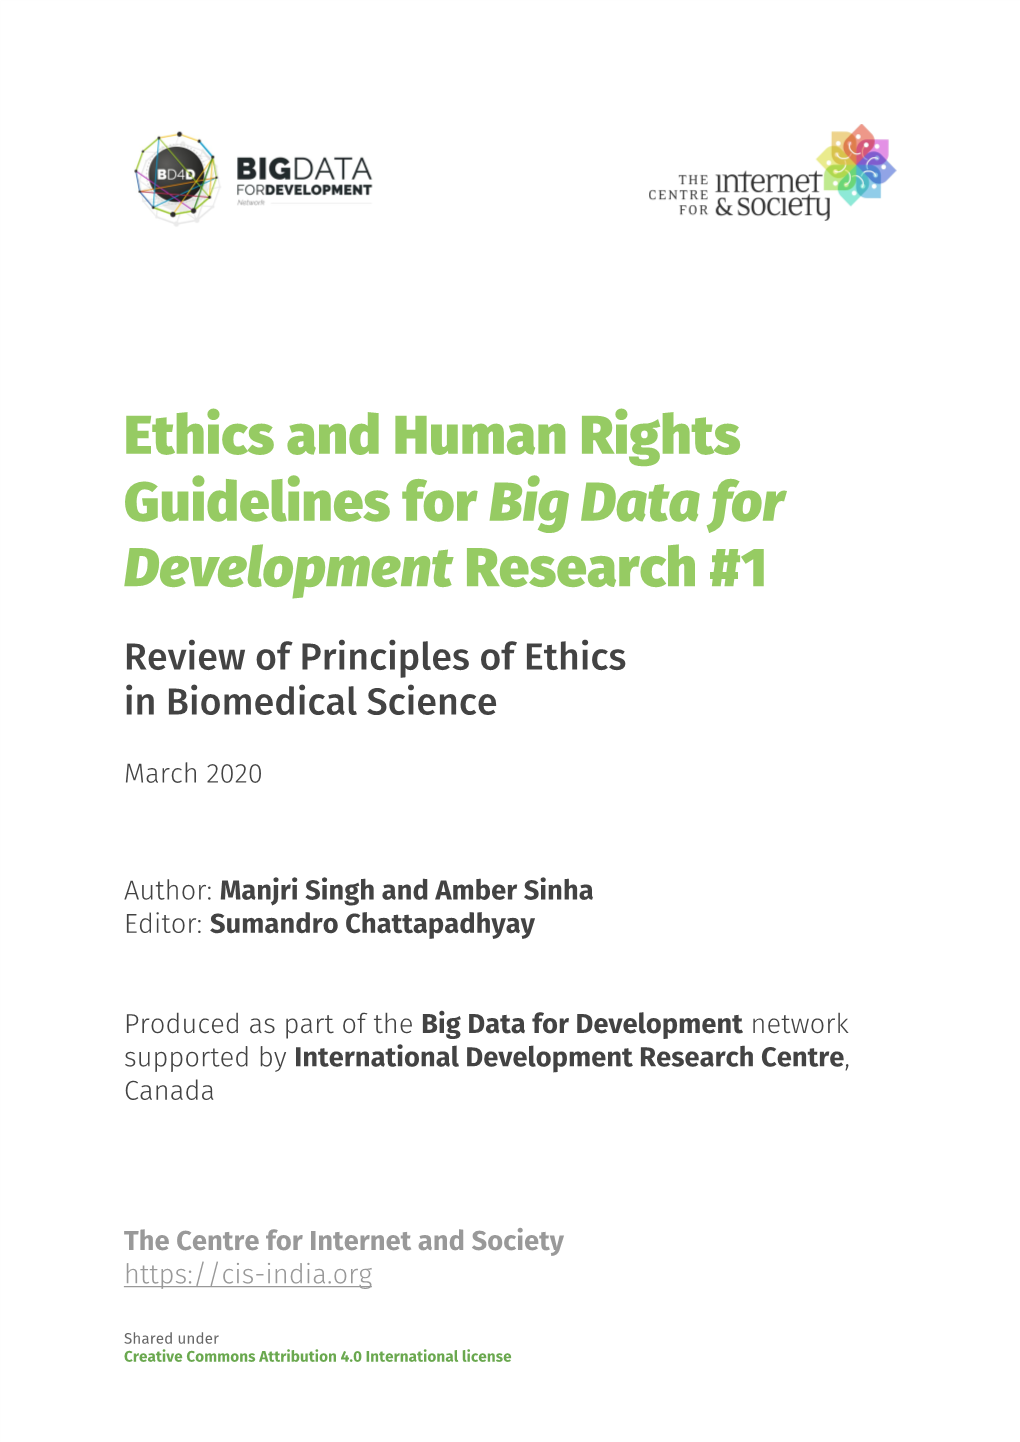 Ethics and Human Rights Guidelines for ​Big Data for Development ​ Research #1